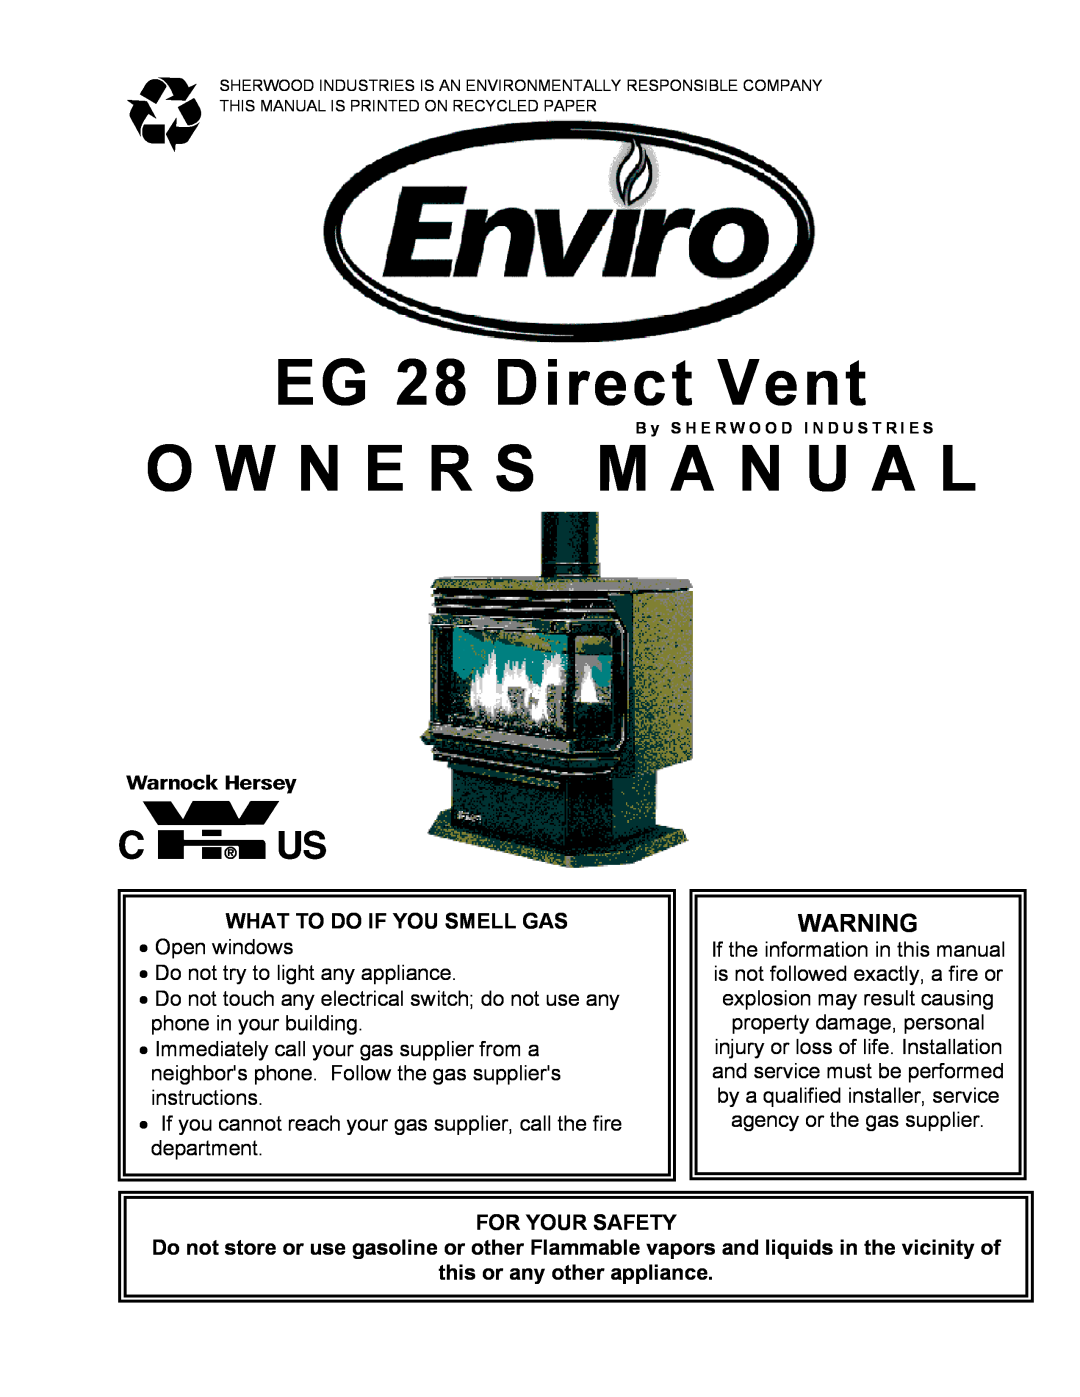 Enviro owner manual What To Do If You Smell Gas, For Your Safety, this or any other appliance, EG 28 Direct Vent 